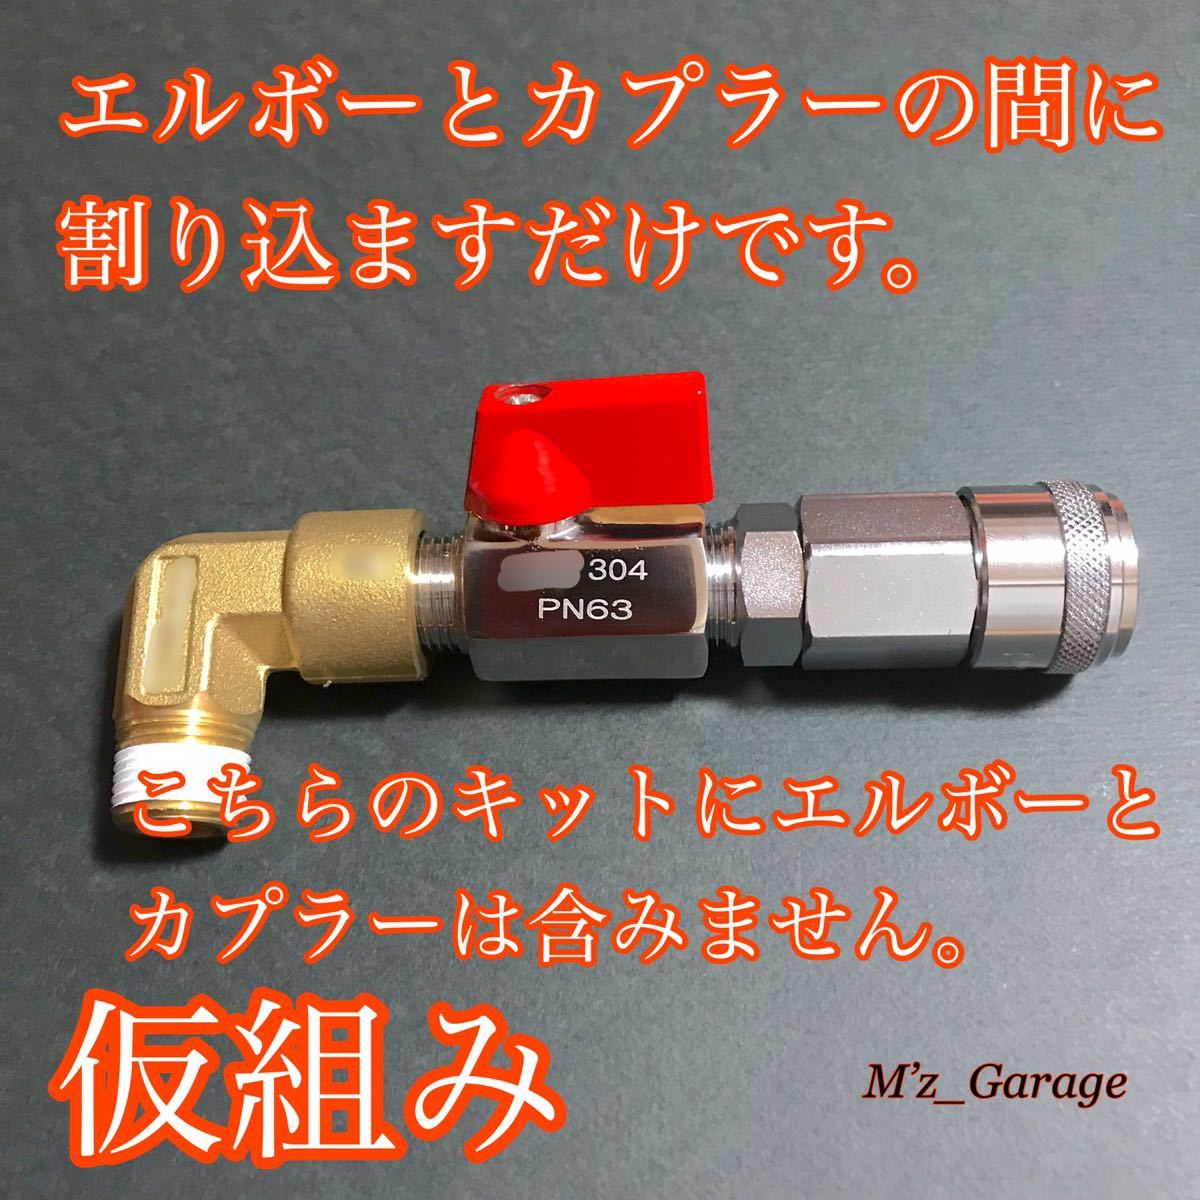 [ Short air valve ] high quality SUS304 made of stainless steel enduring pressure 60kg and more ball valve(bulb) 